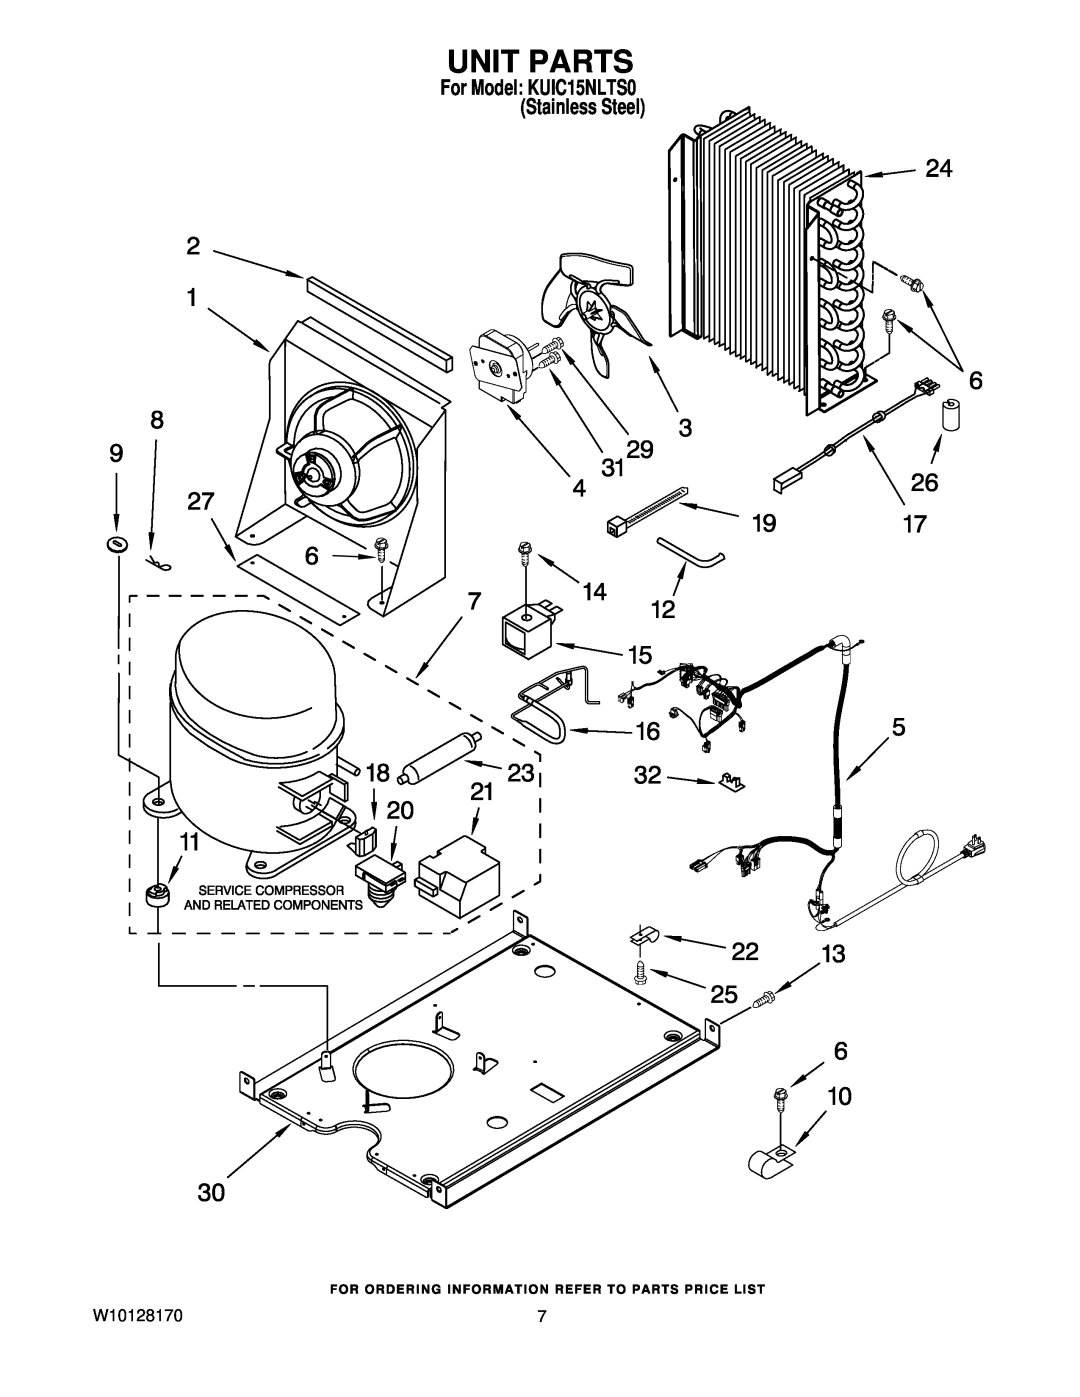 KitchenAid manual Unit Parts, W10128170, For Model KUIC15NLTS0 Stainless Steel 